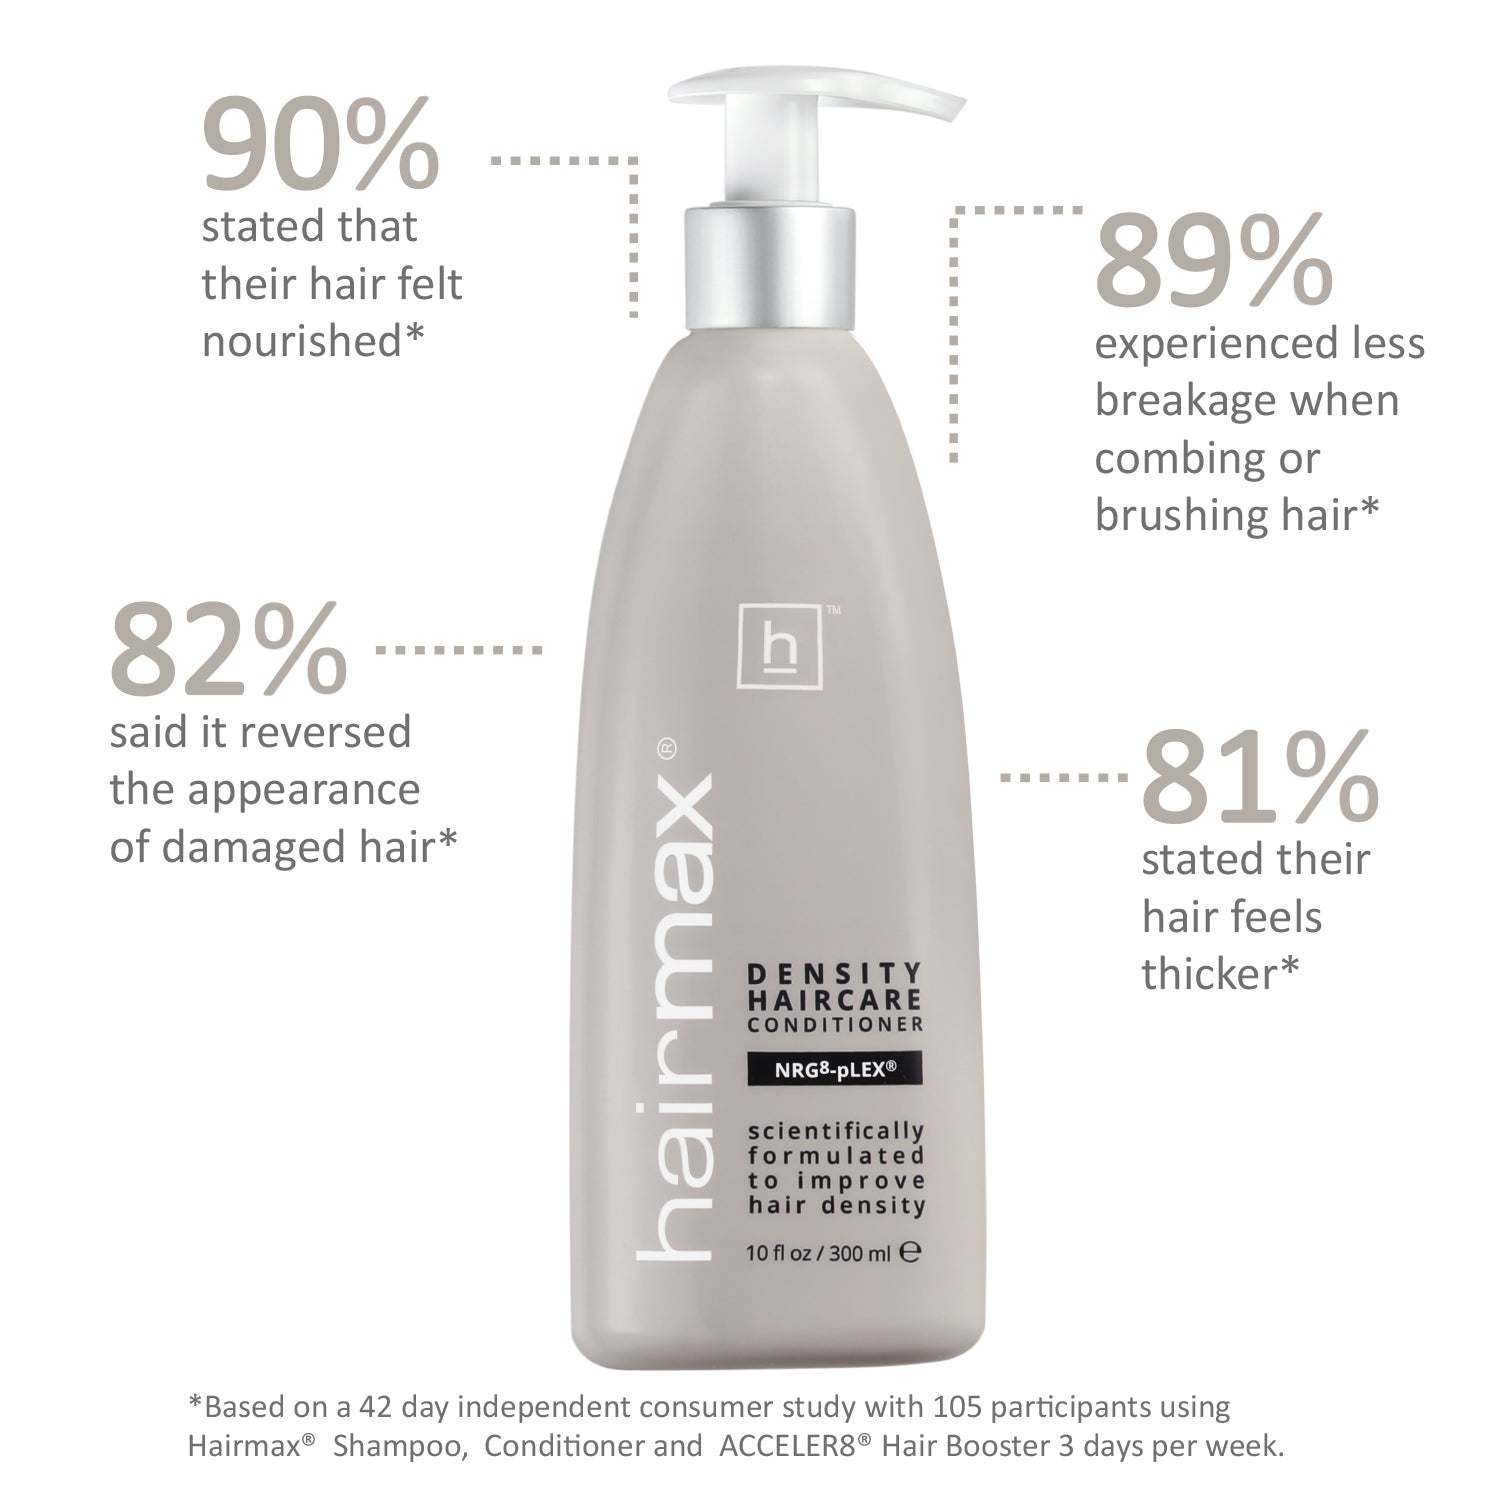 Density Haircare Conditioner